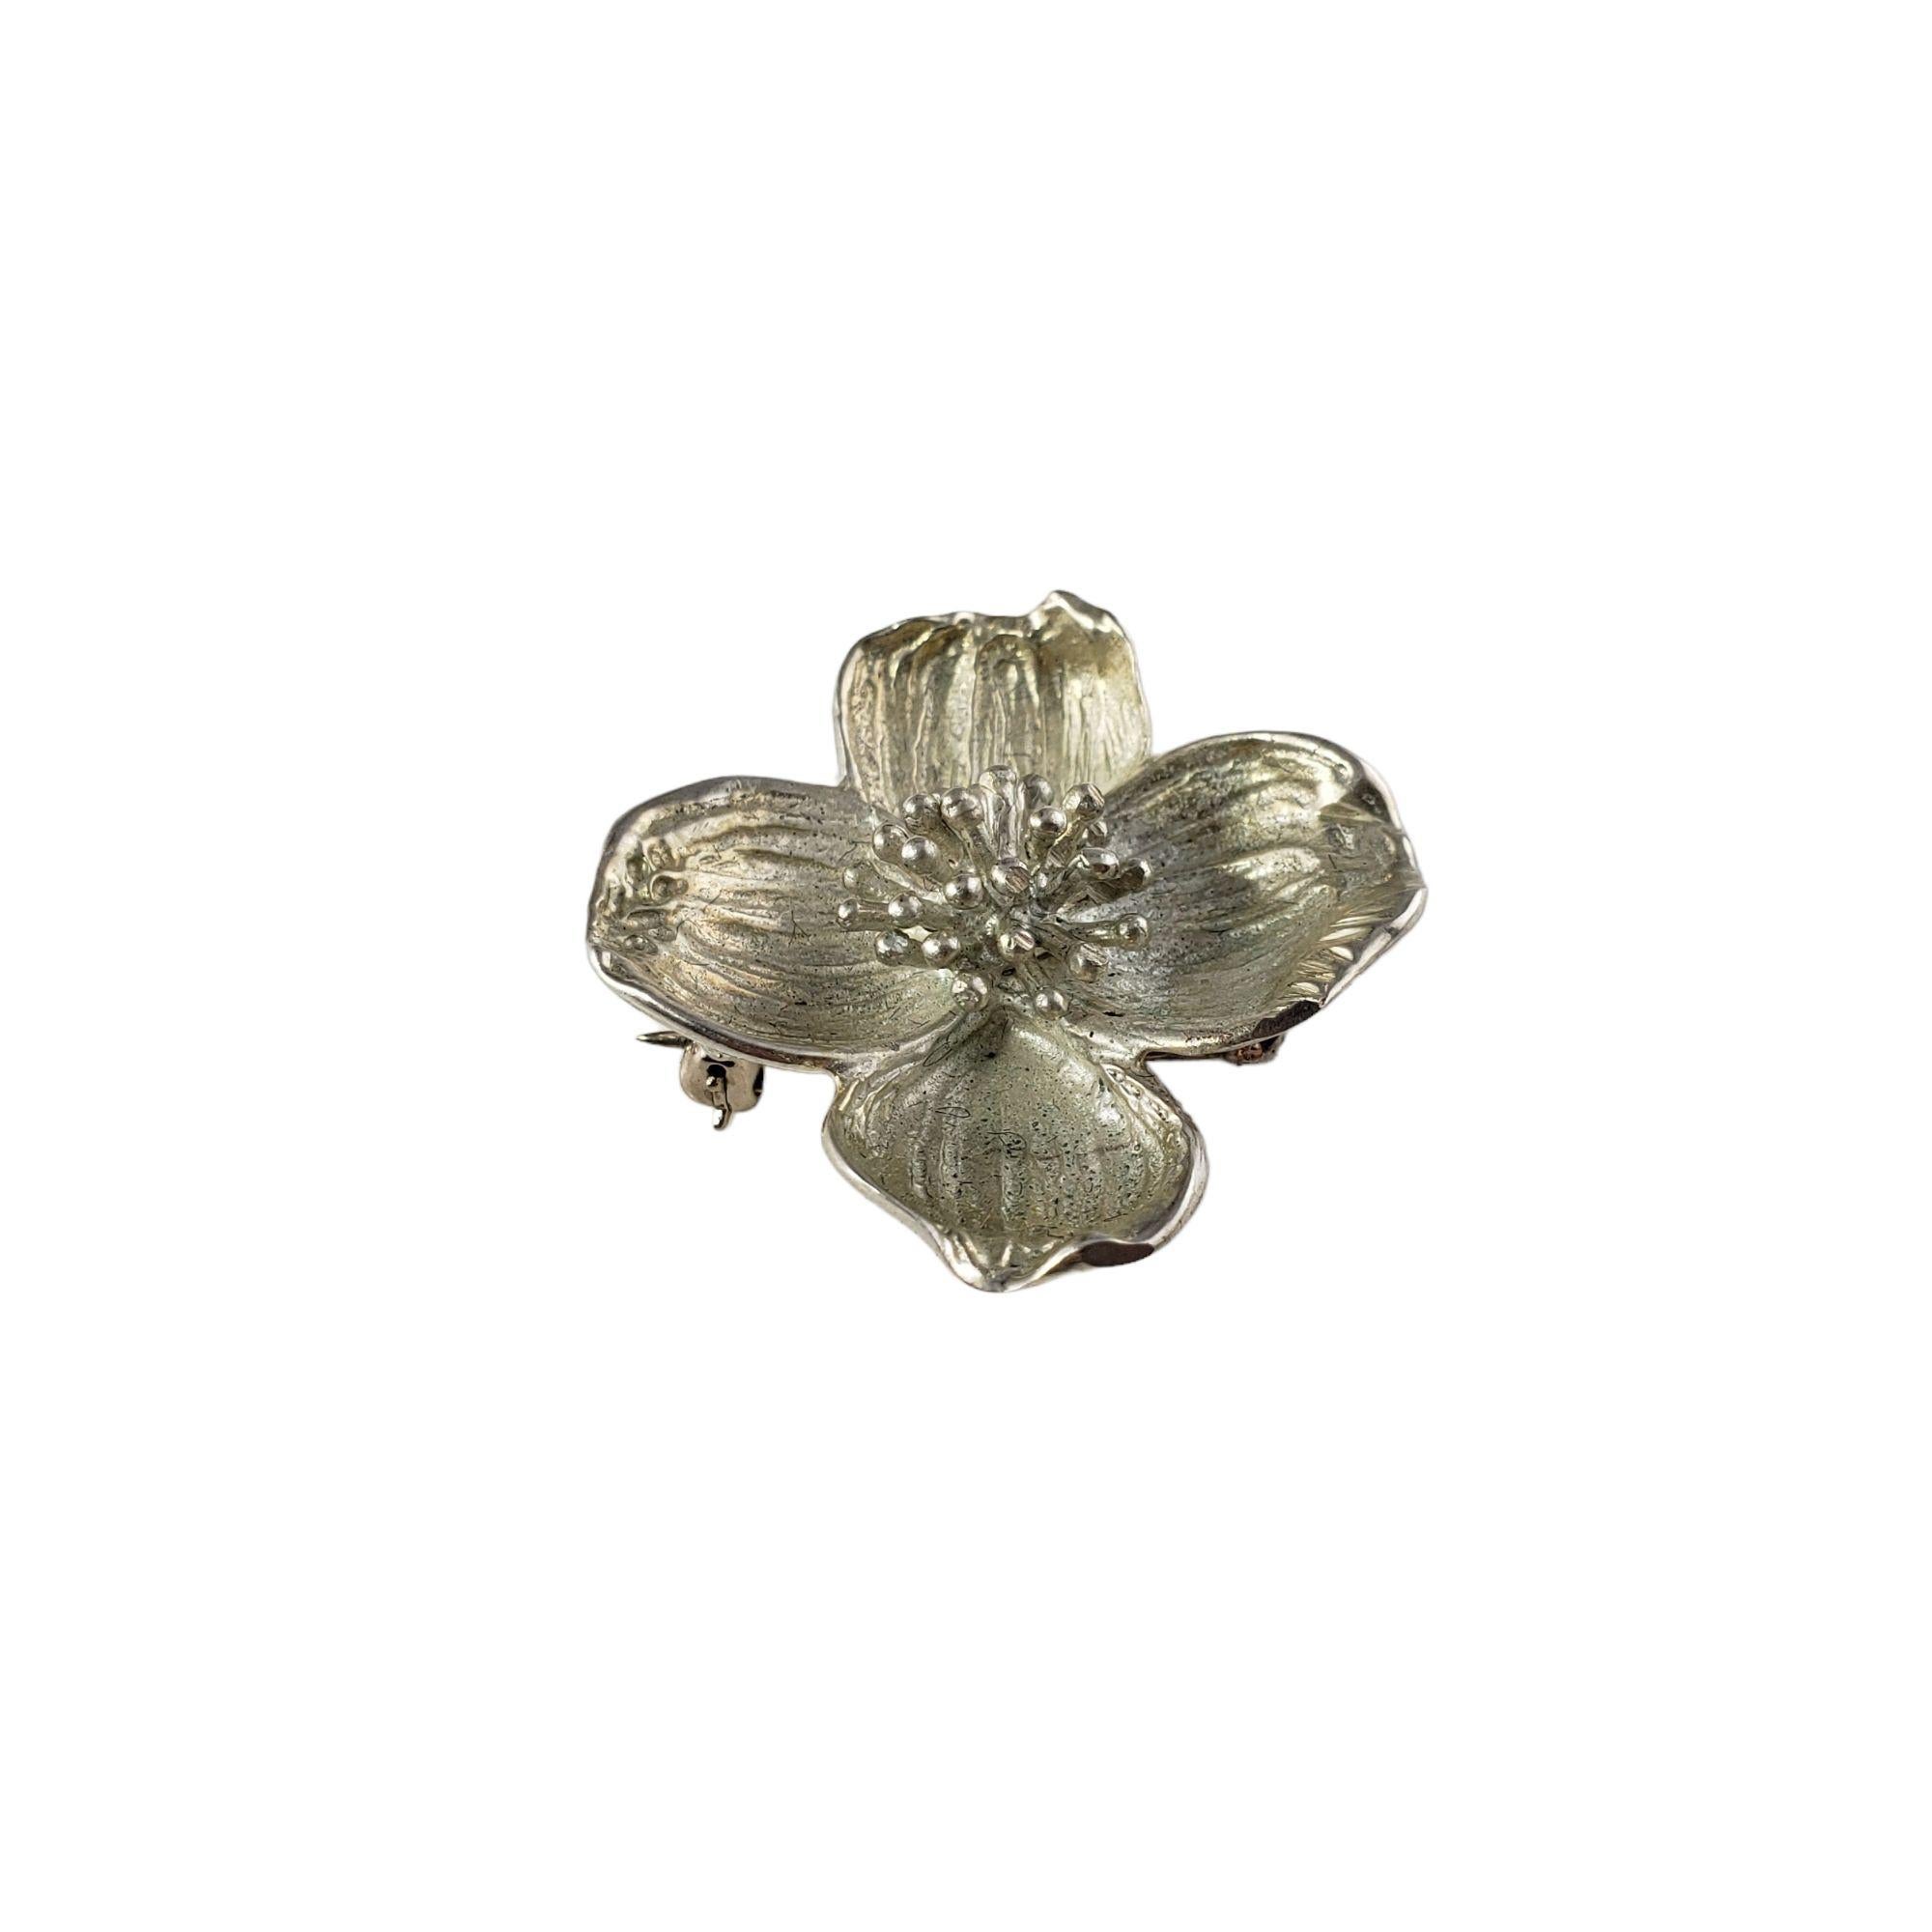 Vintage Tiffany and Co. Sterling Silver Dogwood Blossom Brooch/Pin-

This lovely dogwood blossom brooch is crafted in beautifully detailed sterling silver by Tiffany & Co.

Matching earrings: RL-00013776
Matching bracelet: RL-00013782

Size: 34 mm x